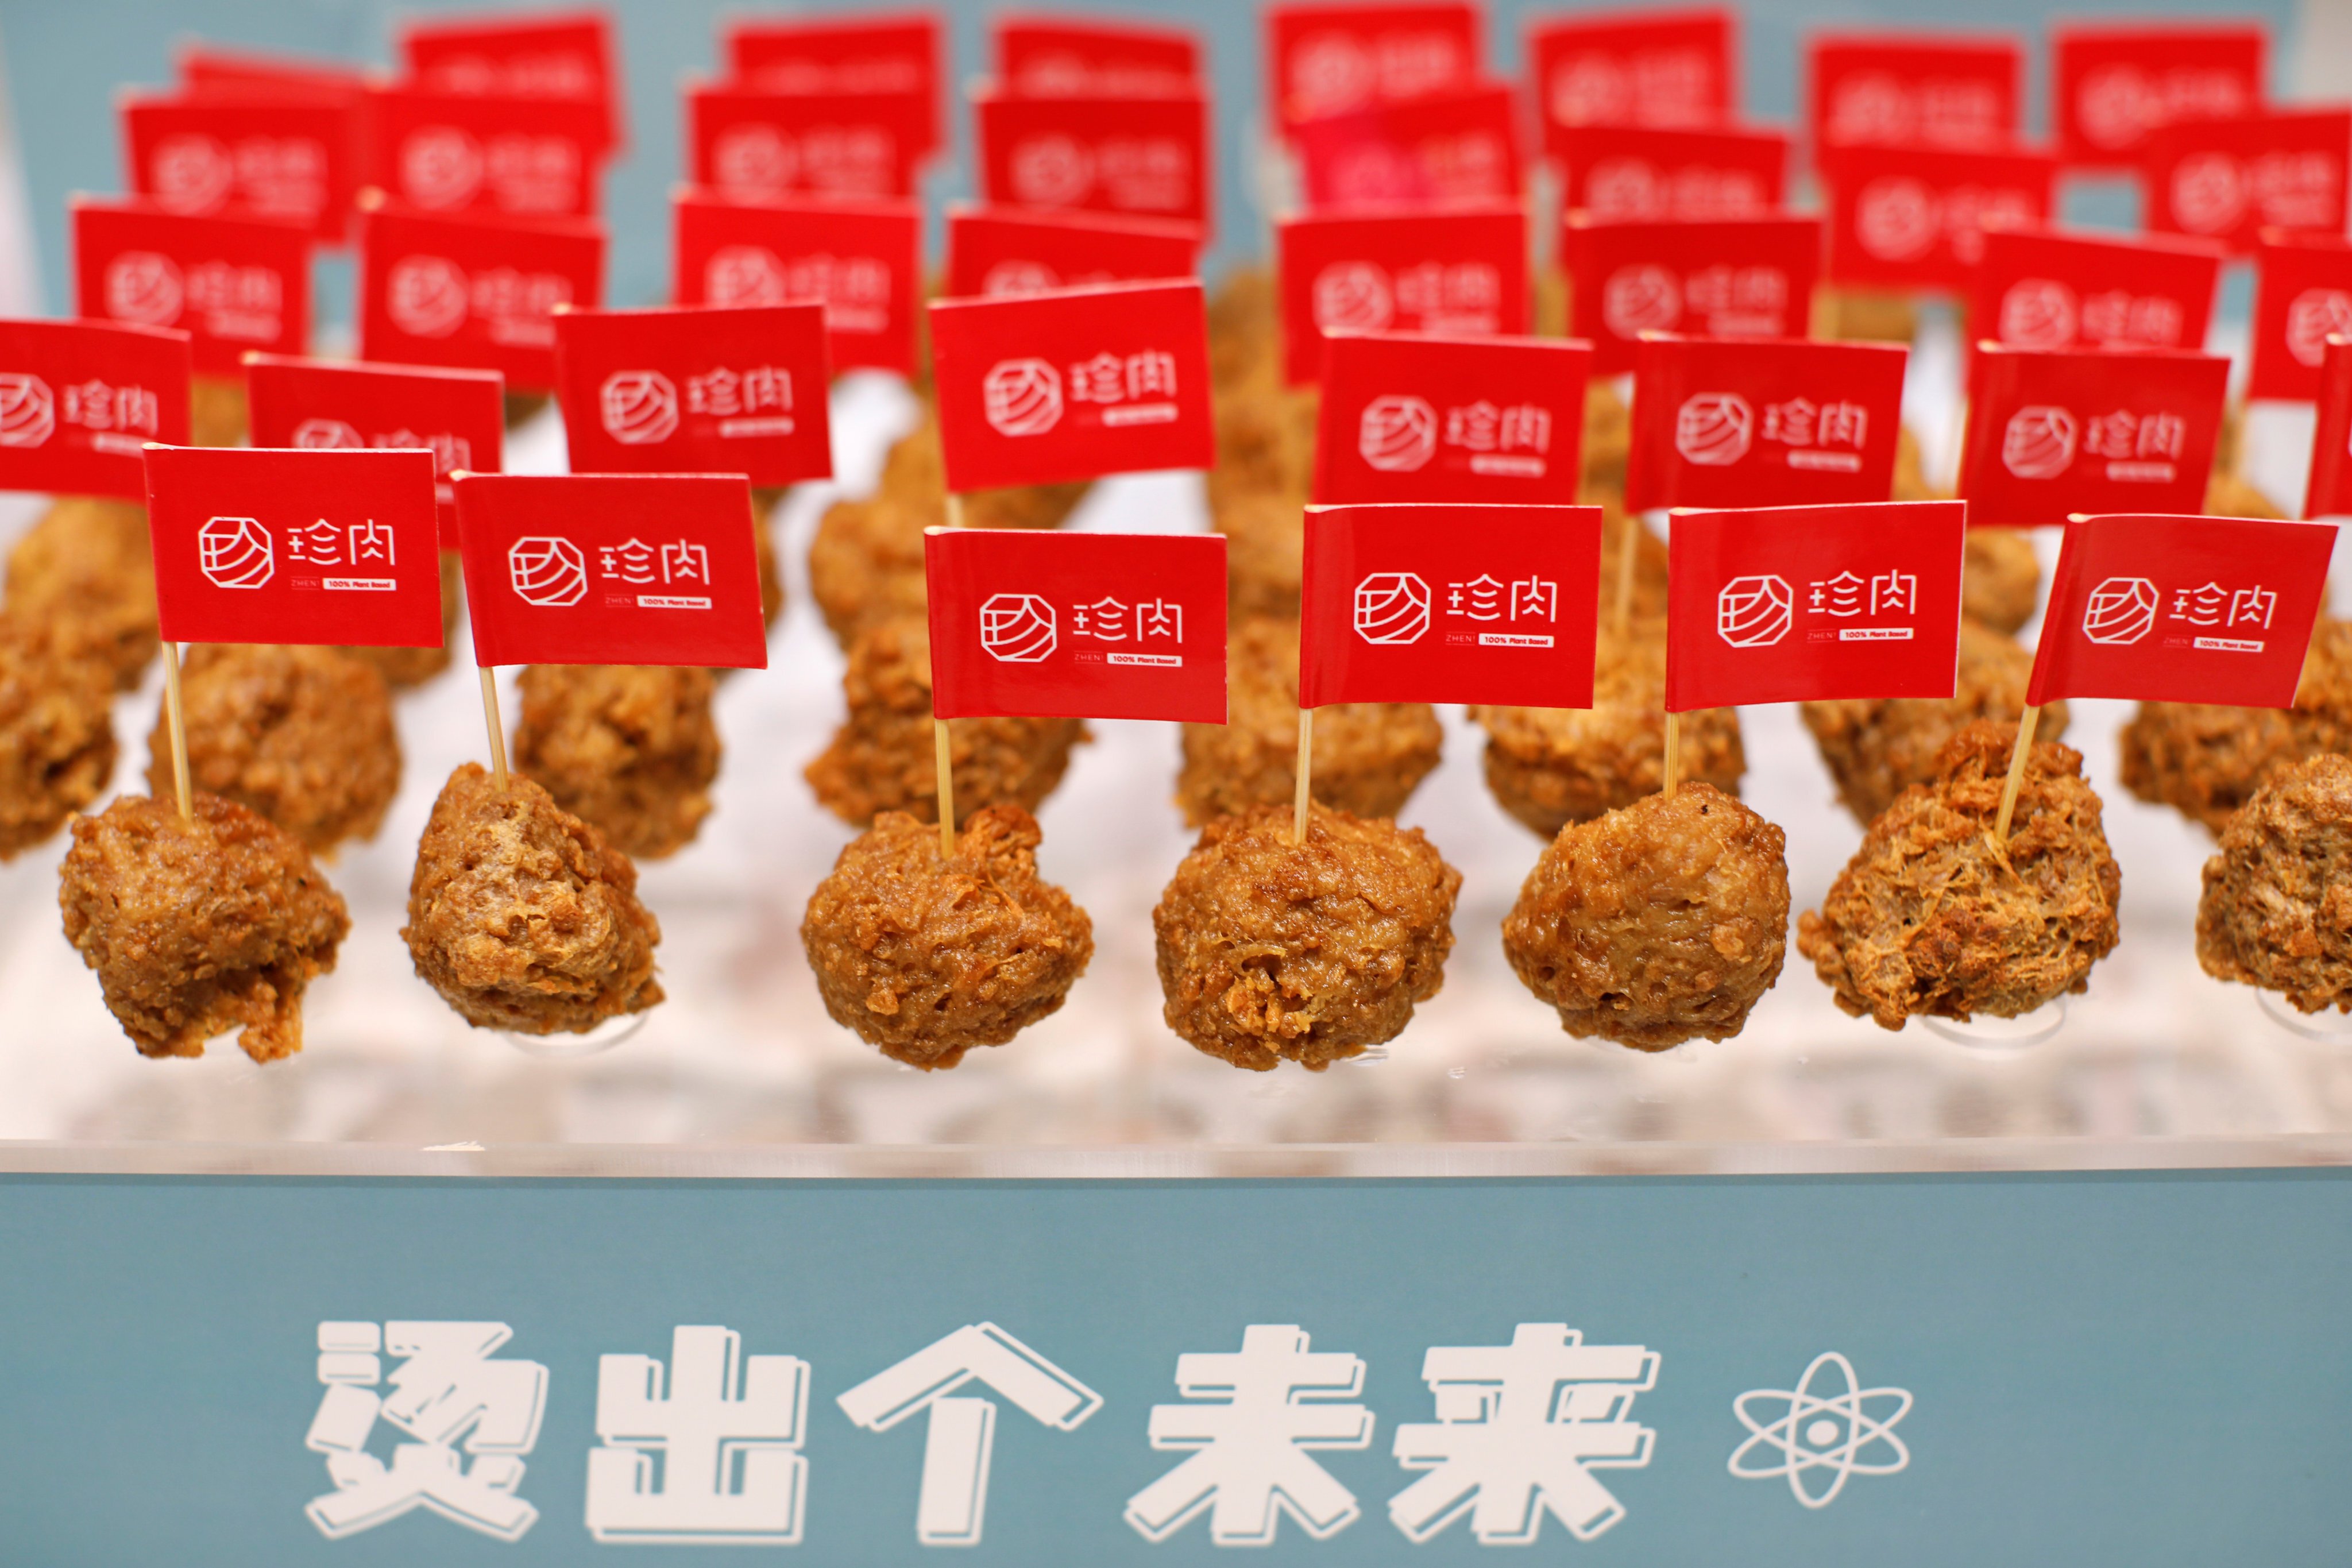 Plant-based meatballs by Zhenmeat displayed at a Hope Tree restaurant in Beijing on September 4, 2020. How seriously China takes alternative meat will determine the country’s contribution to the international biodiversity agenda. Photo: Reuters